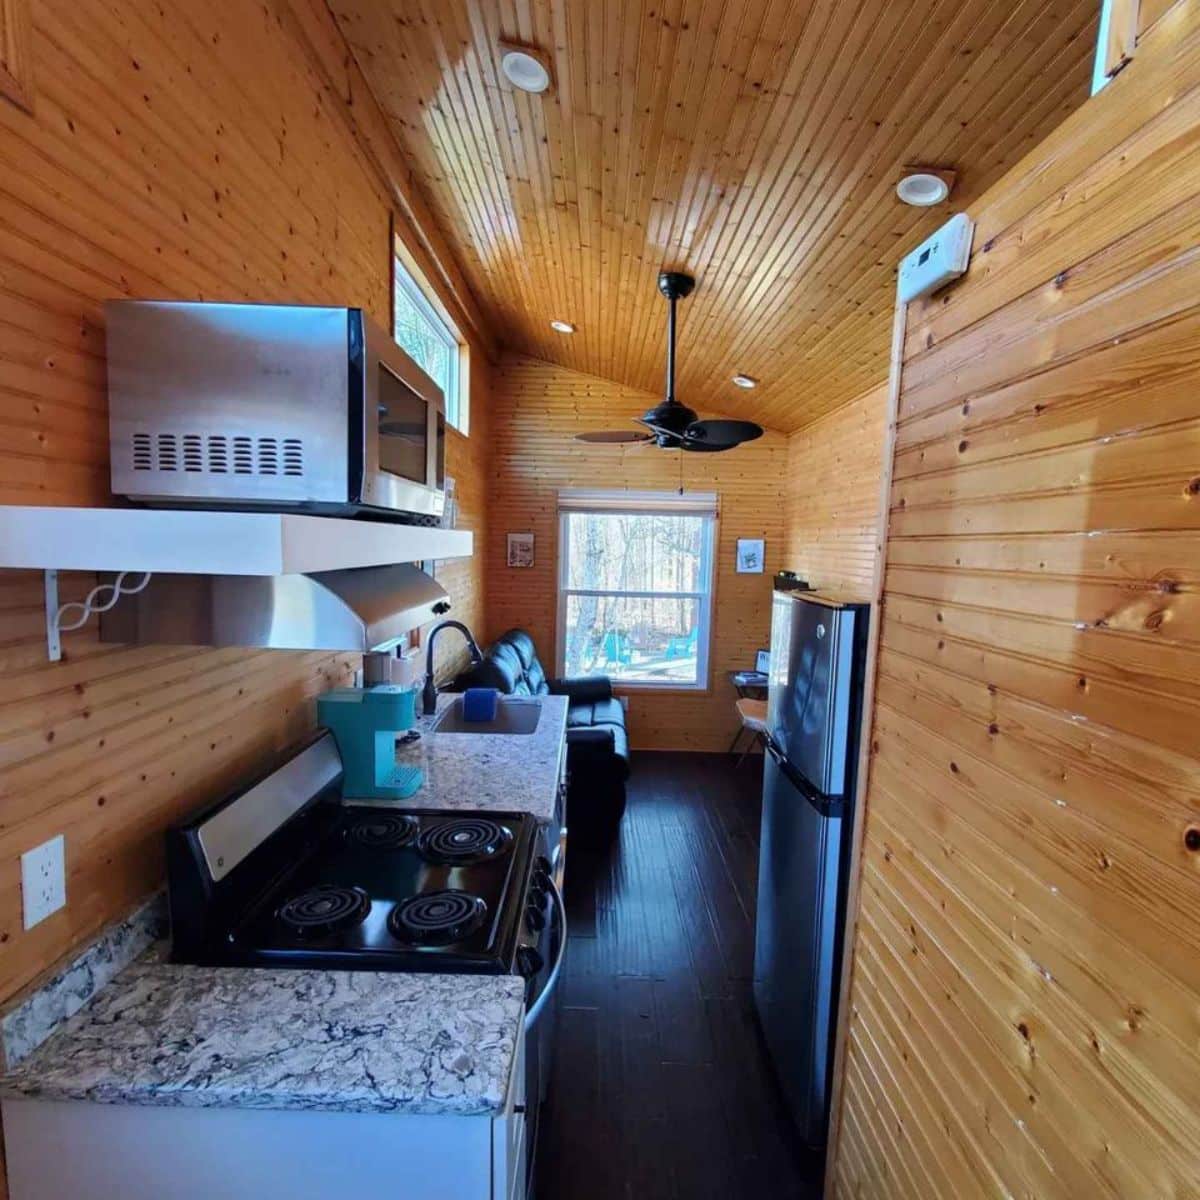 kitchen area of tiny home with downstairs bedroom